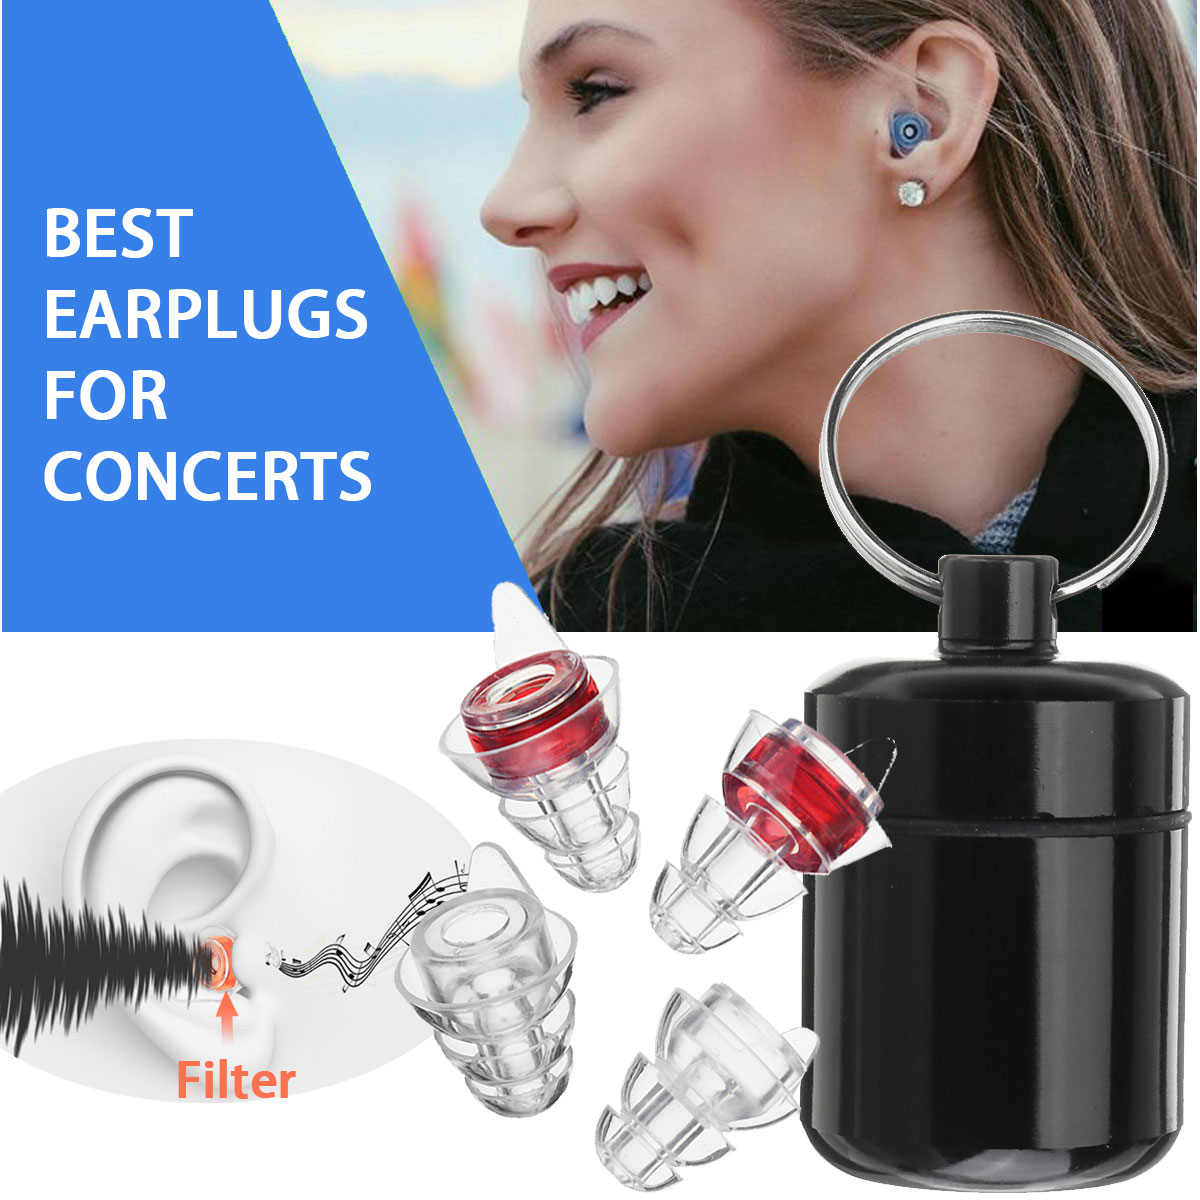 1-Pair-27db-Noise-Cancelling-Hearing-Protection-Earplugs-Camping-Travel-Cycling-Sleeping-Swimming-Ea-1650800-1